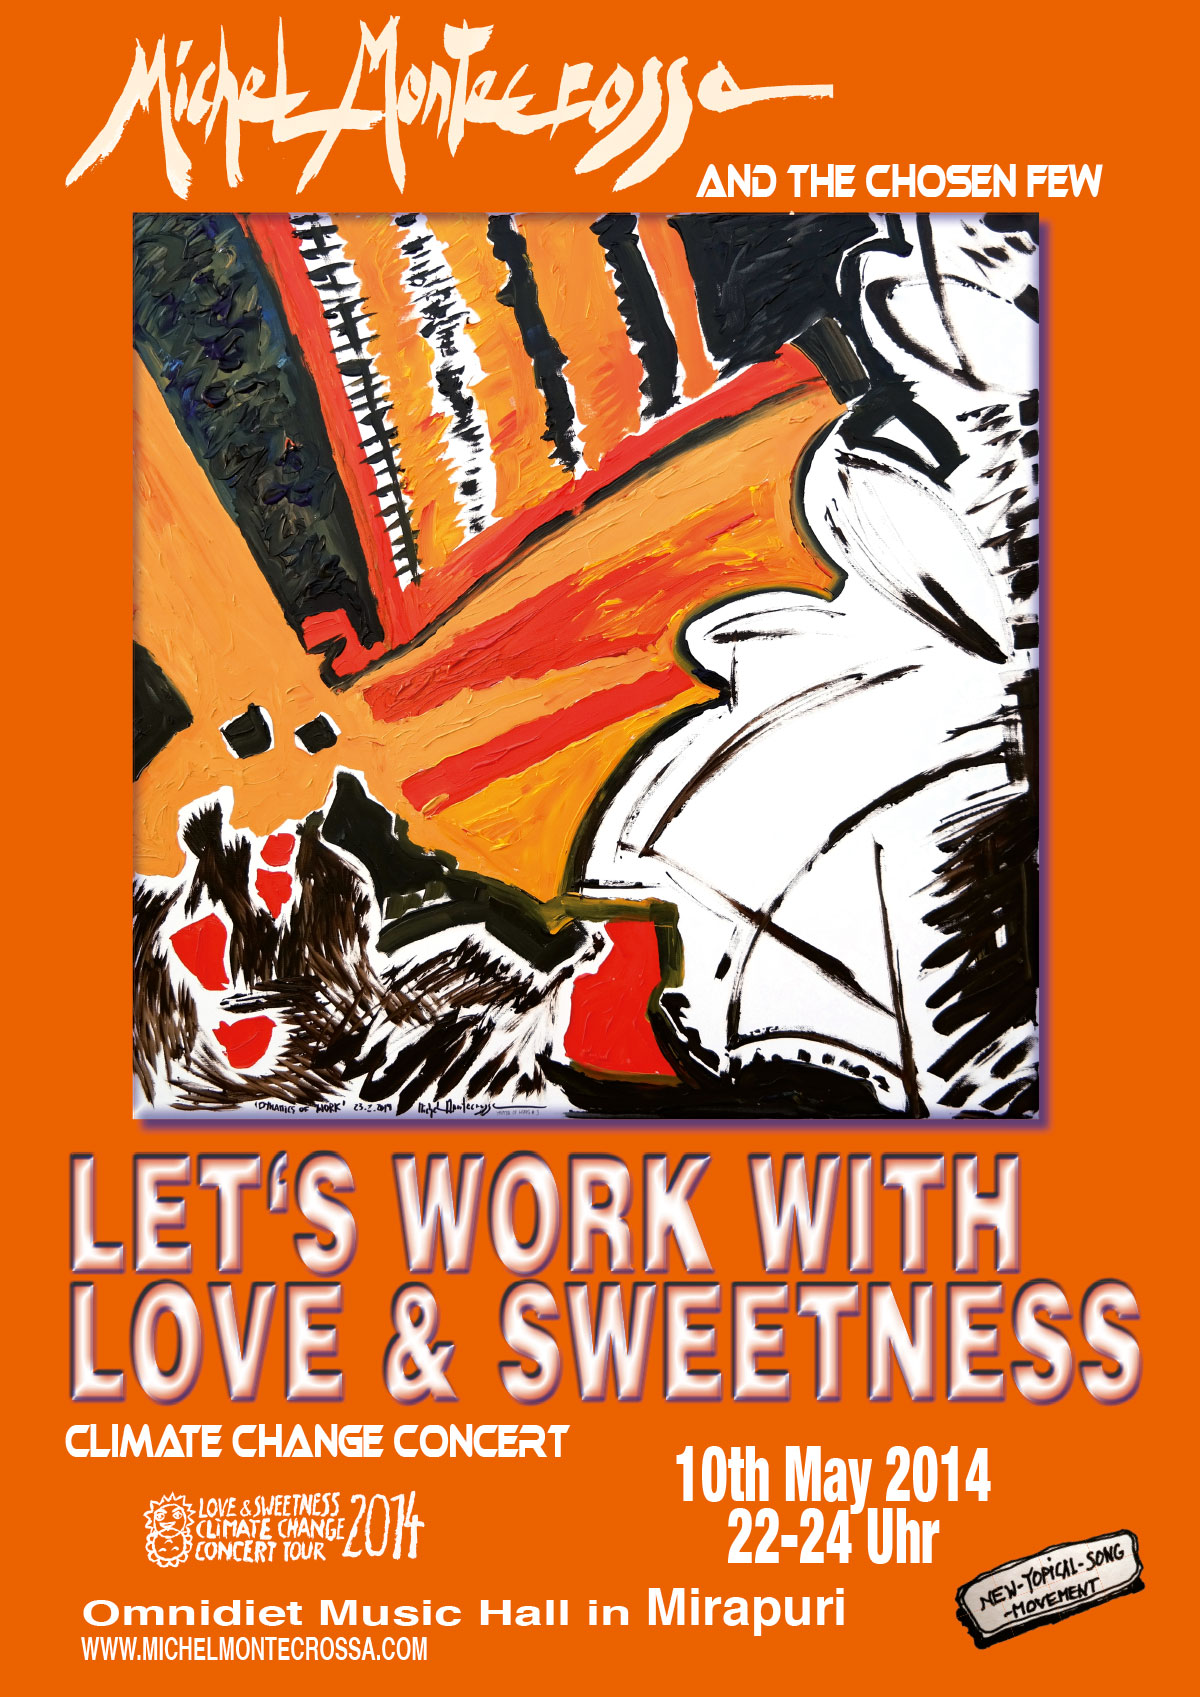 Let's Work With Love & Sweetness Climate Change Concert